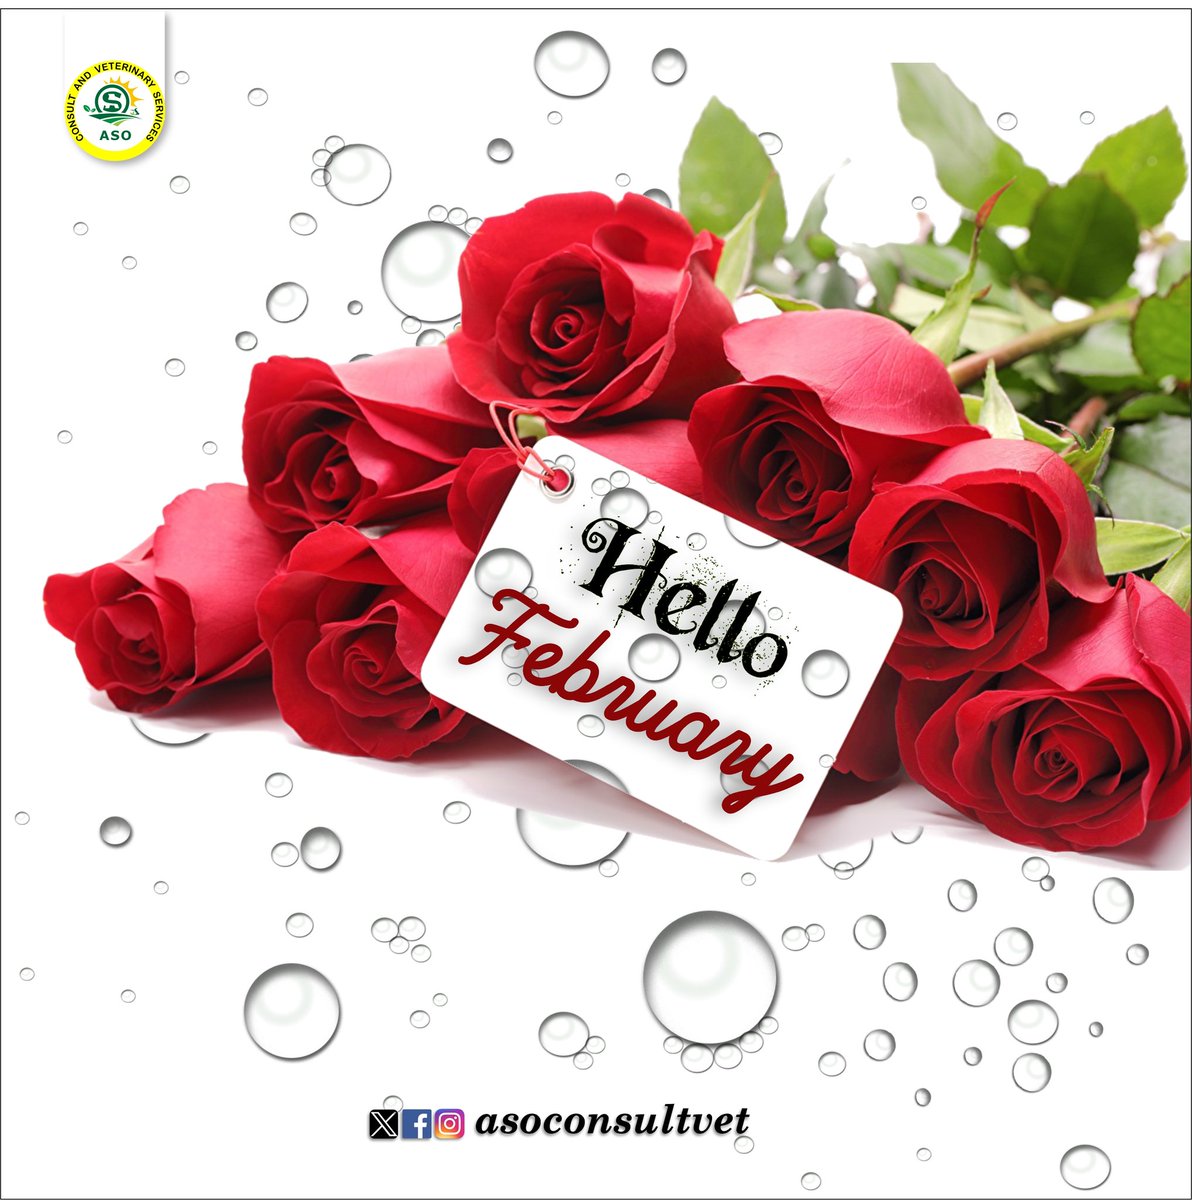 Happy new month to all our amazing customers and prospects!... Cheers to an awesome February🥂.

#agriculture #NewMonth #happynewmonth #february #asoconsultvet #livestockfarming #agricbizinnigeria #agricbusiness #farminginnigeria #livestock